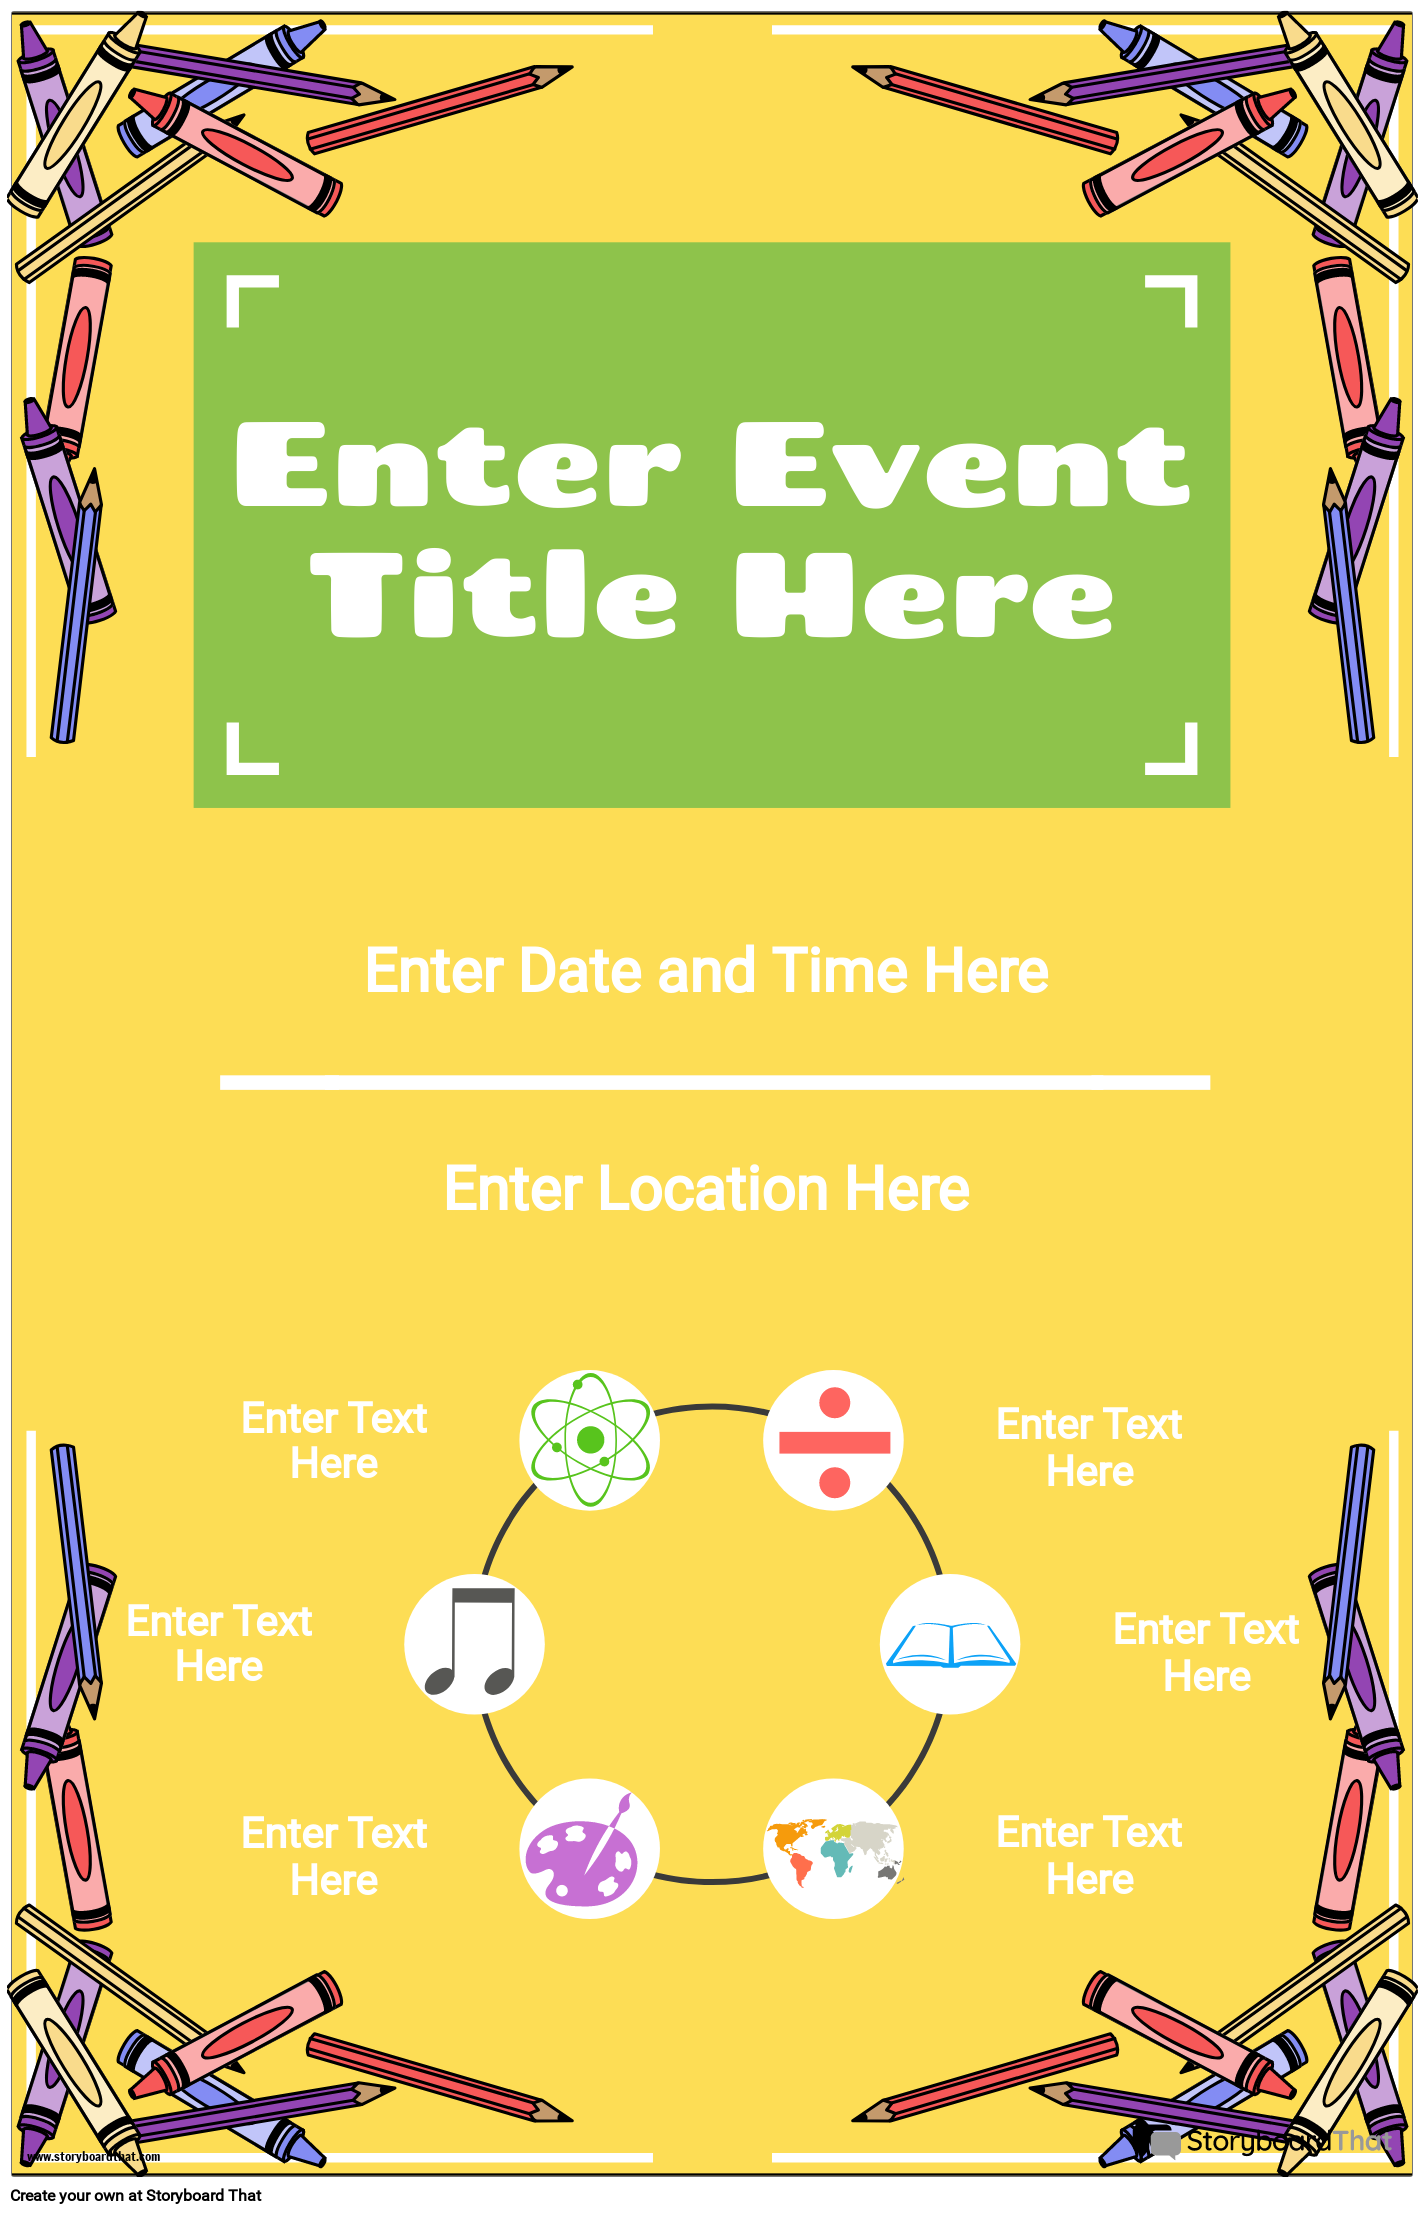 Event Poster Design Featuring a Yellow Background